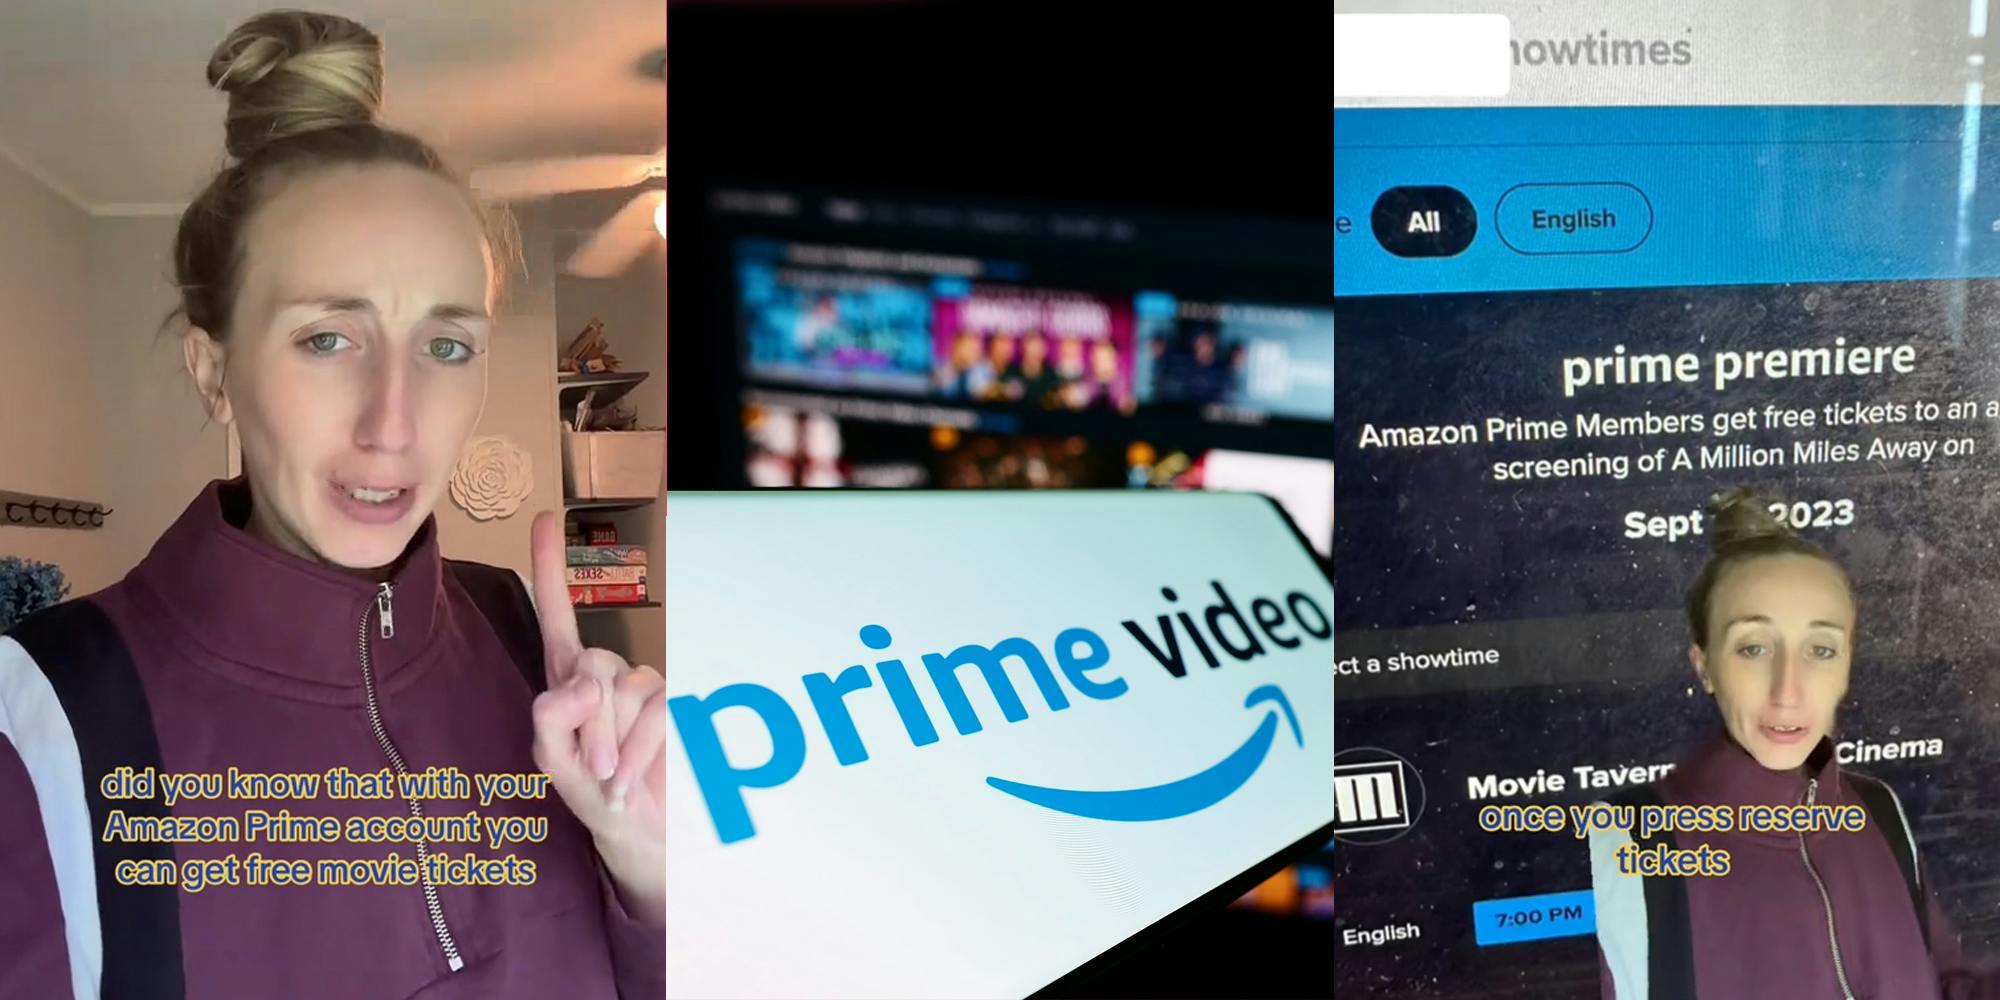 Prime user speaking with caption "did you know that with your Amazon Prime account you can get free movie tickets" (l) Amazon Prime Video on phone screen and on laptop screen (c) Prime user greenscreen TikTok over image of Prime with caption "once you press preserve tickets" (r)